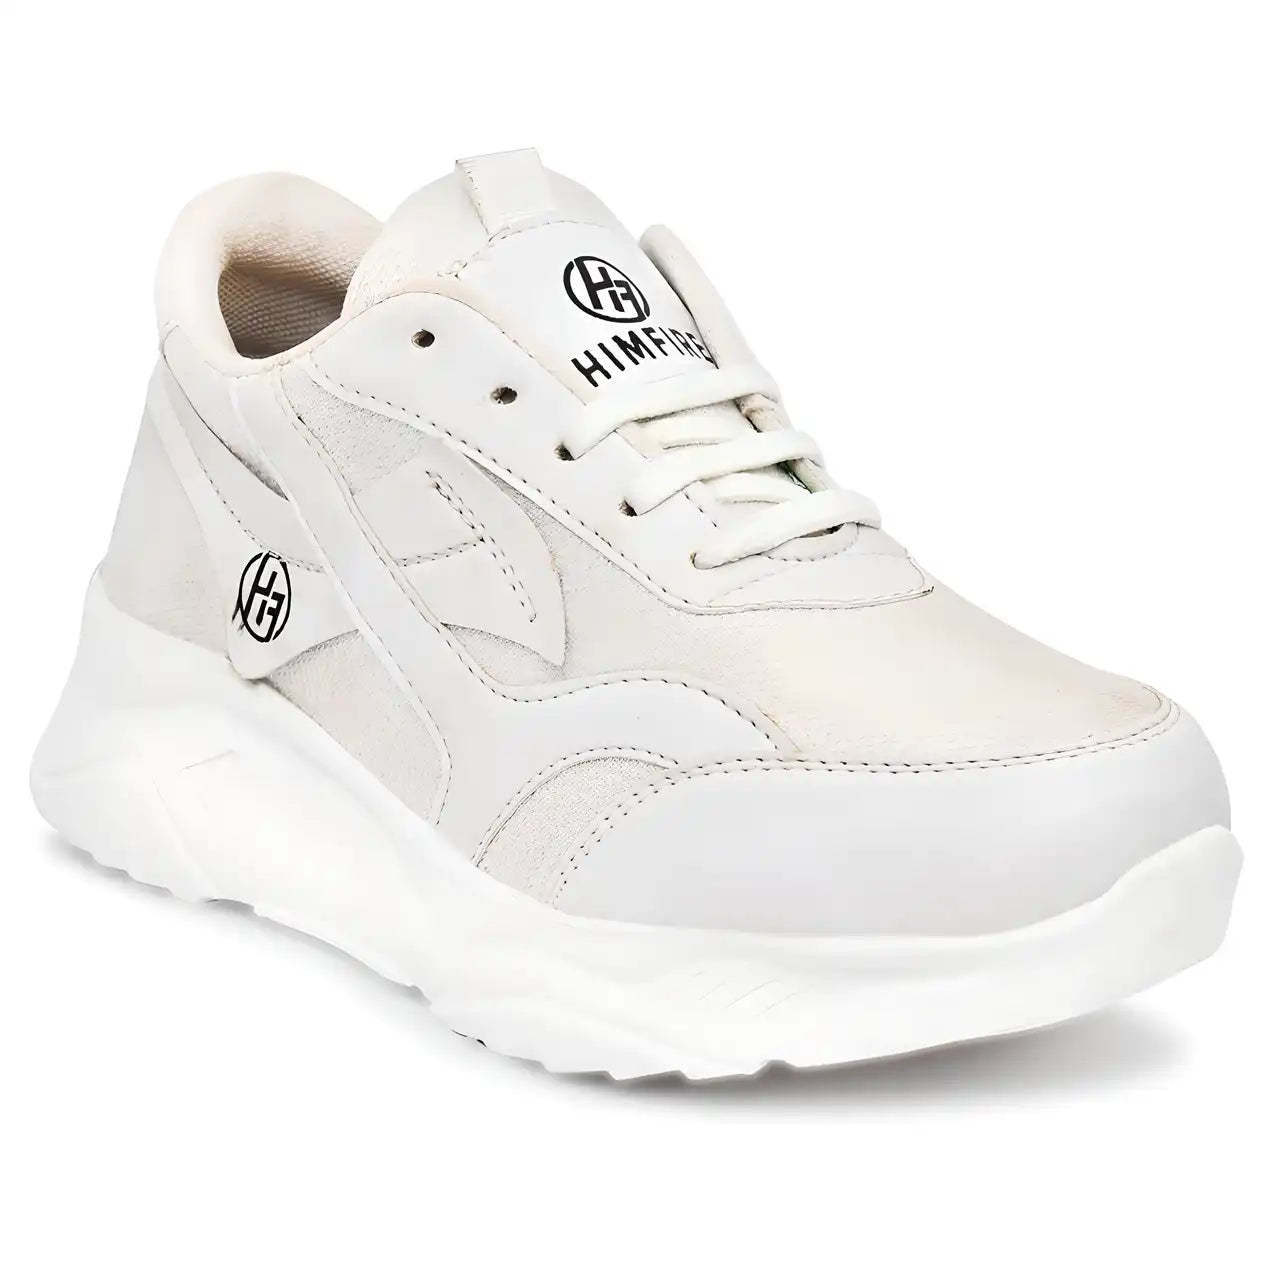 Casual sneaker shoes For women (white)